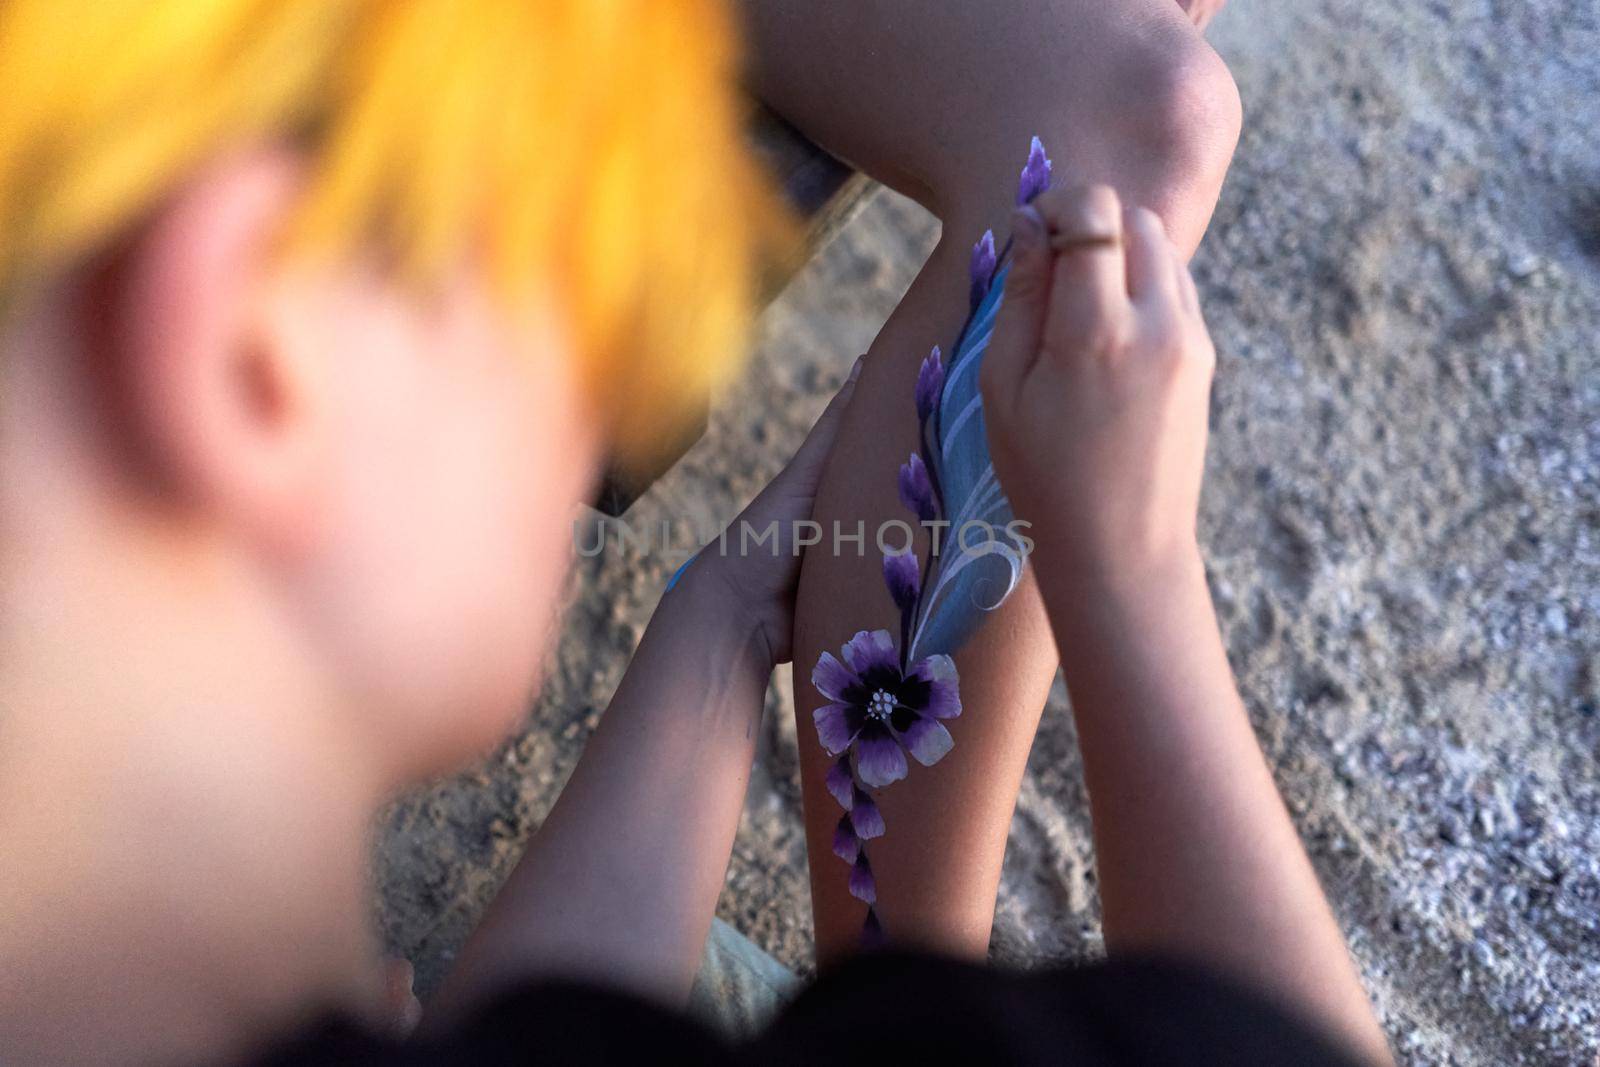 Top view and close up photo of an artist painting a flower in the leg of a woman on the beach